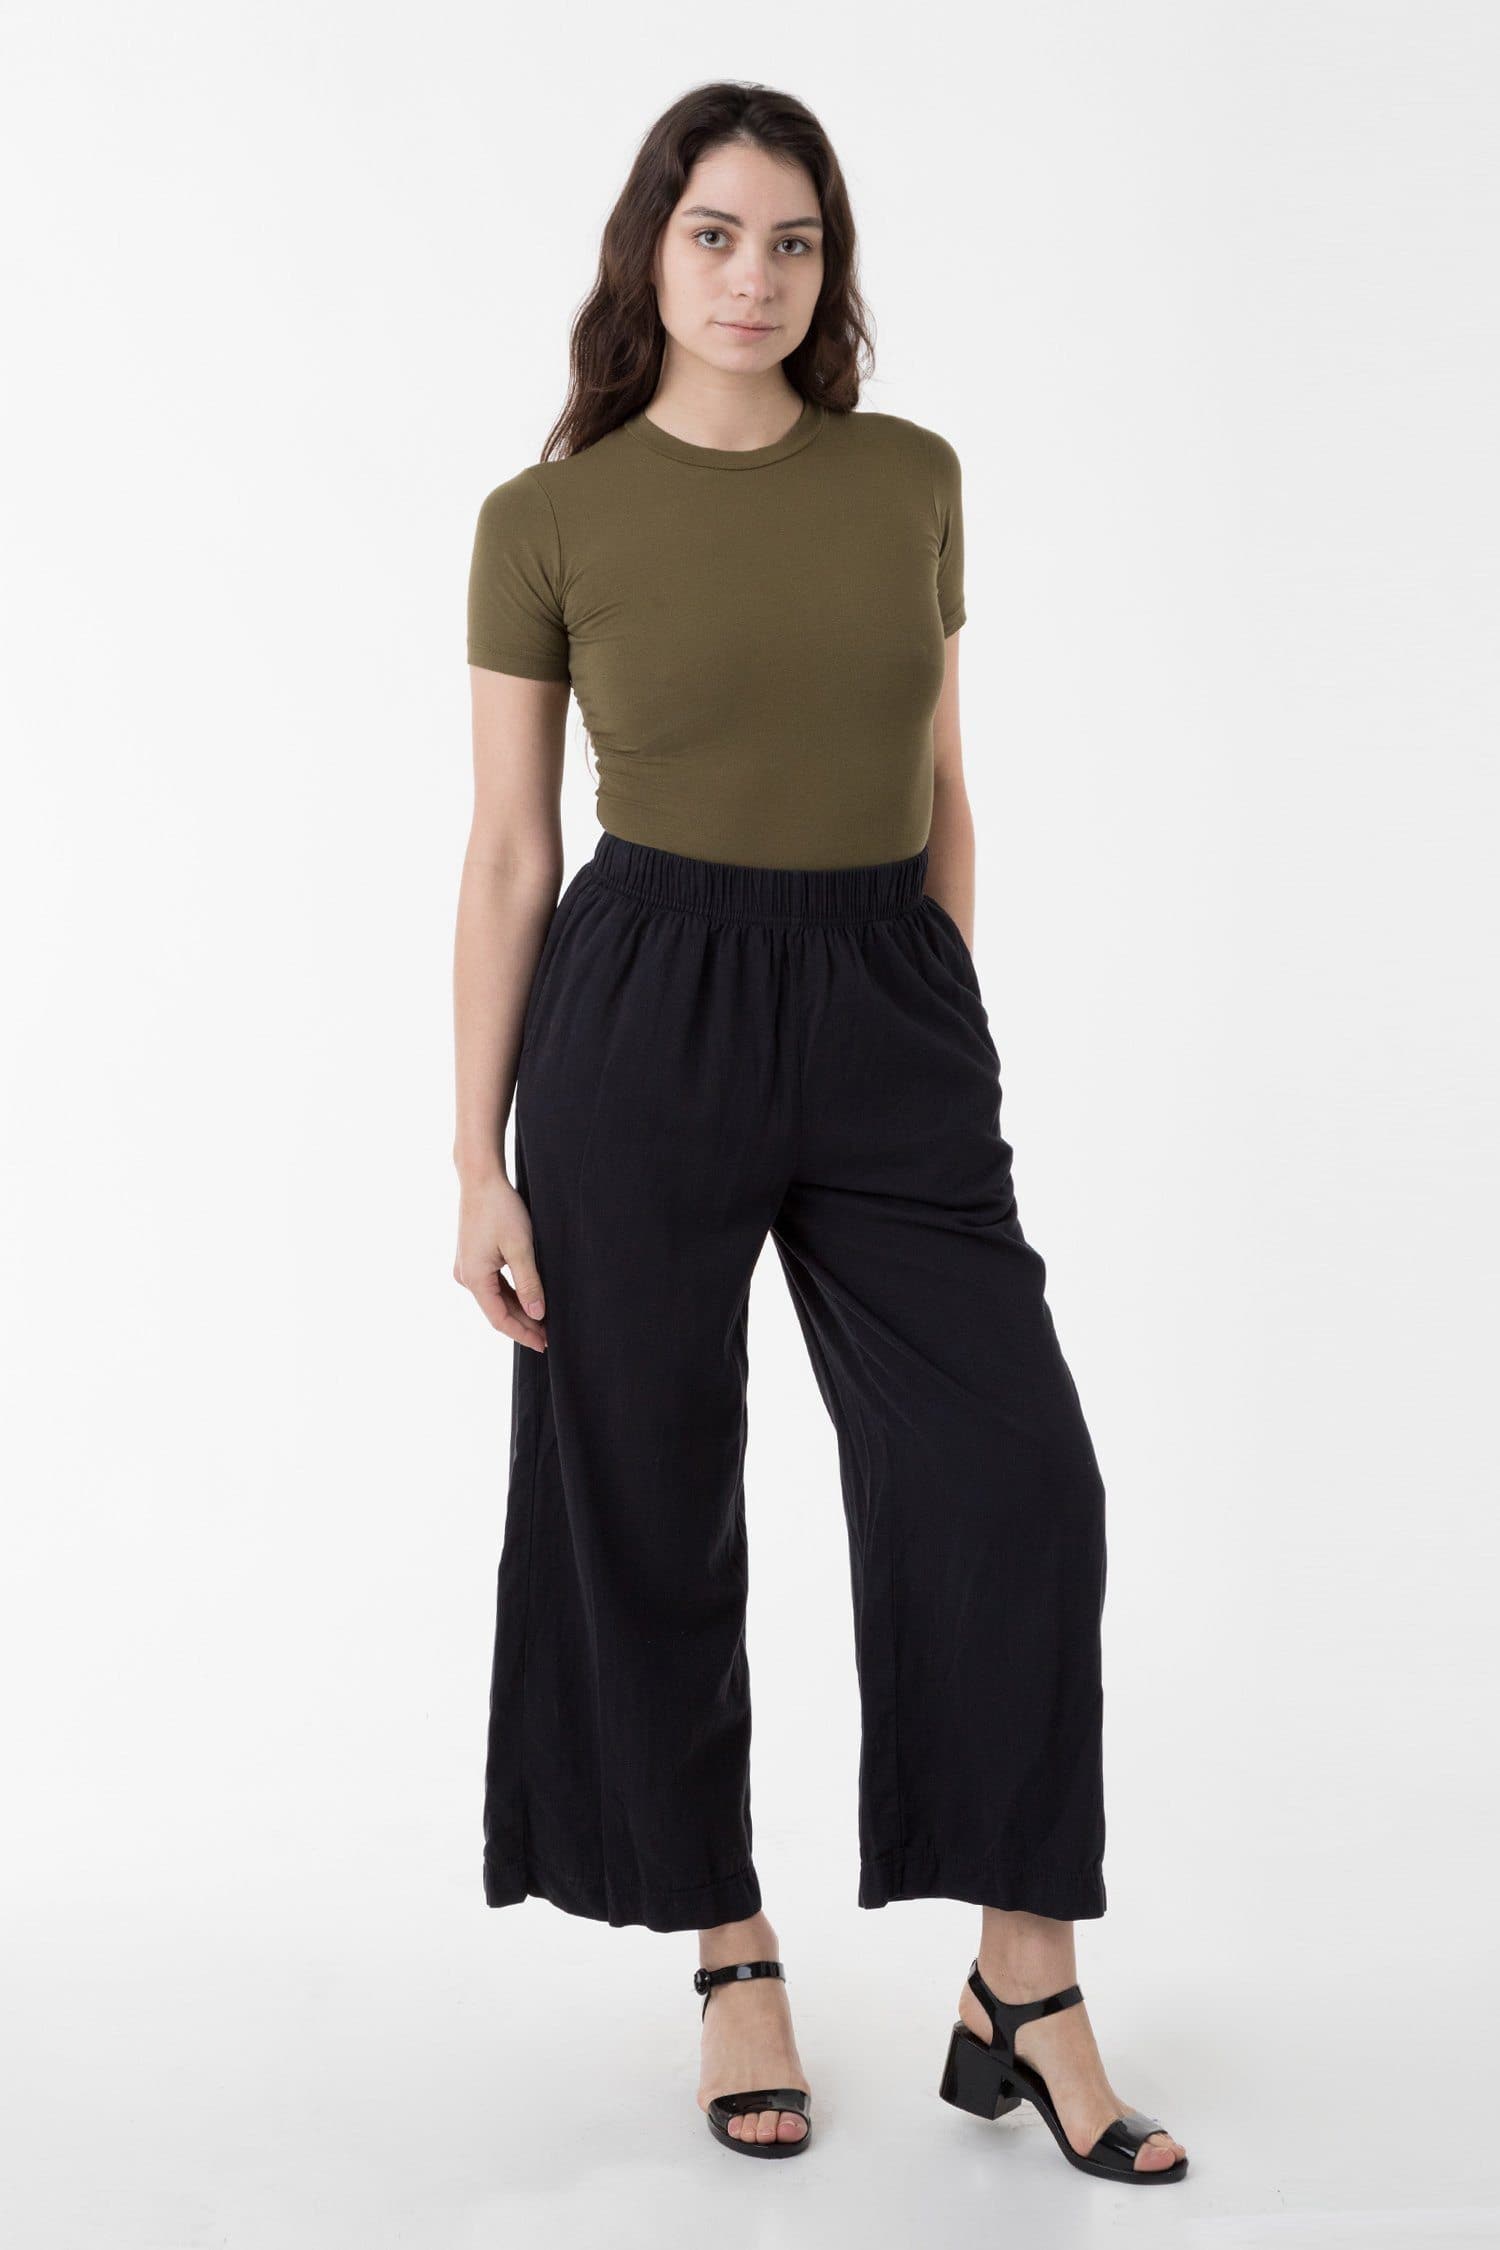 Women’s Daily Twill Crop Pant made with Organic Cotton | Pact